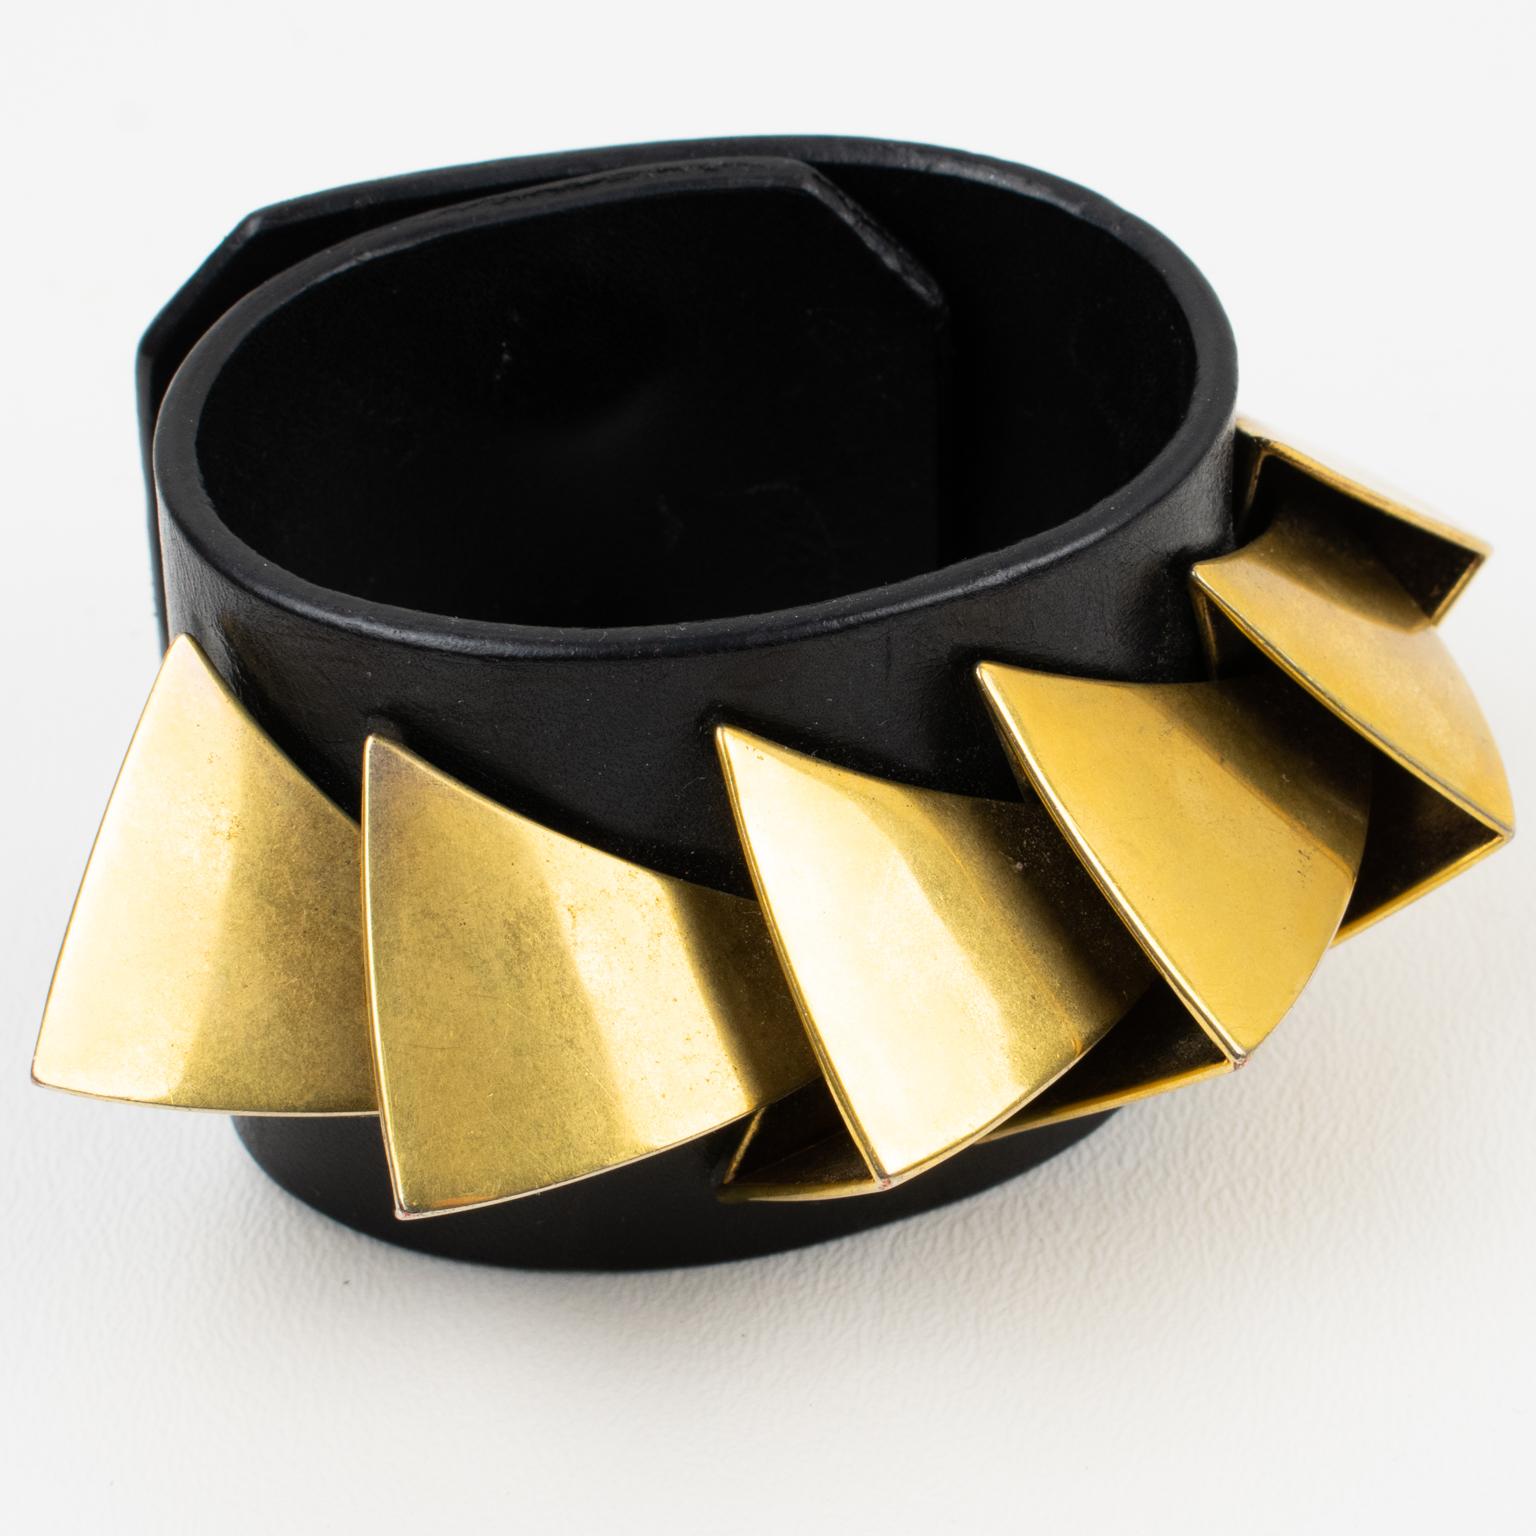 This stylish Givenchy Paris signed belt bracelet was designed by Riccardo Tisci for his 2011 Obsedia Collection. The piece features an oversized band shape in black leather ornate with brutalist geometric gilded brass dimensional elements. The